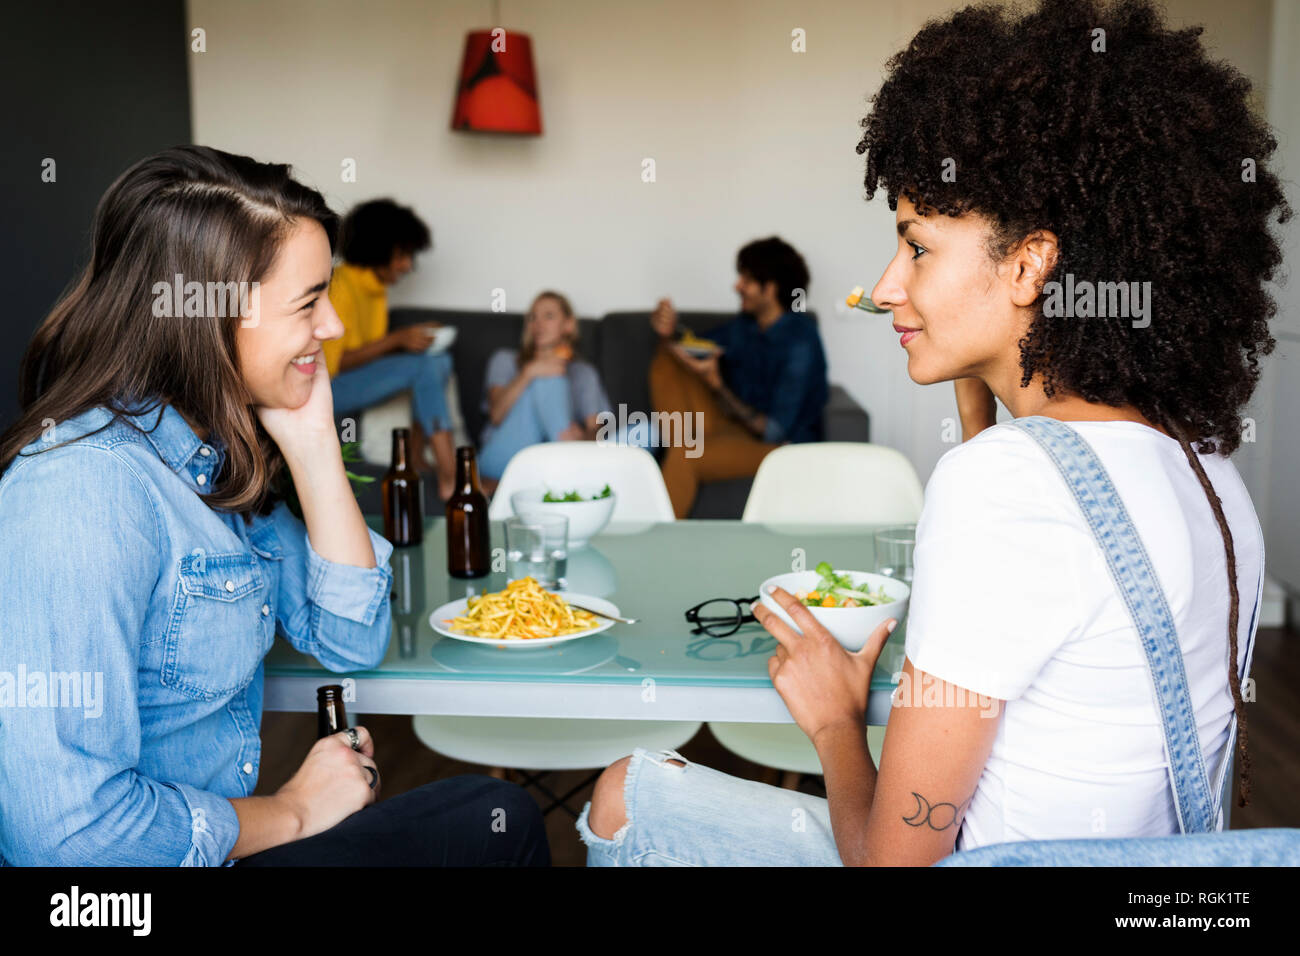 Girlfriends sitting at dining table with friends in background Stock Photo